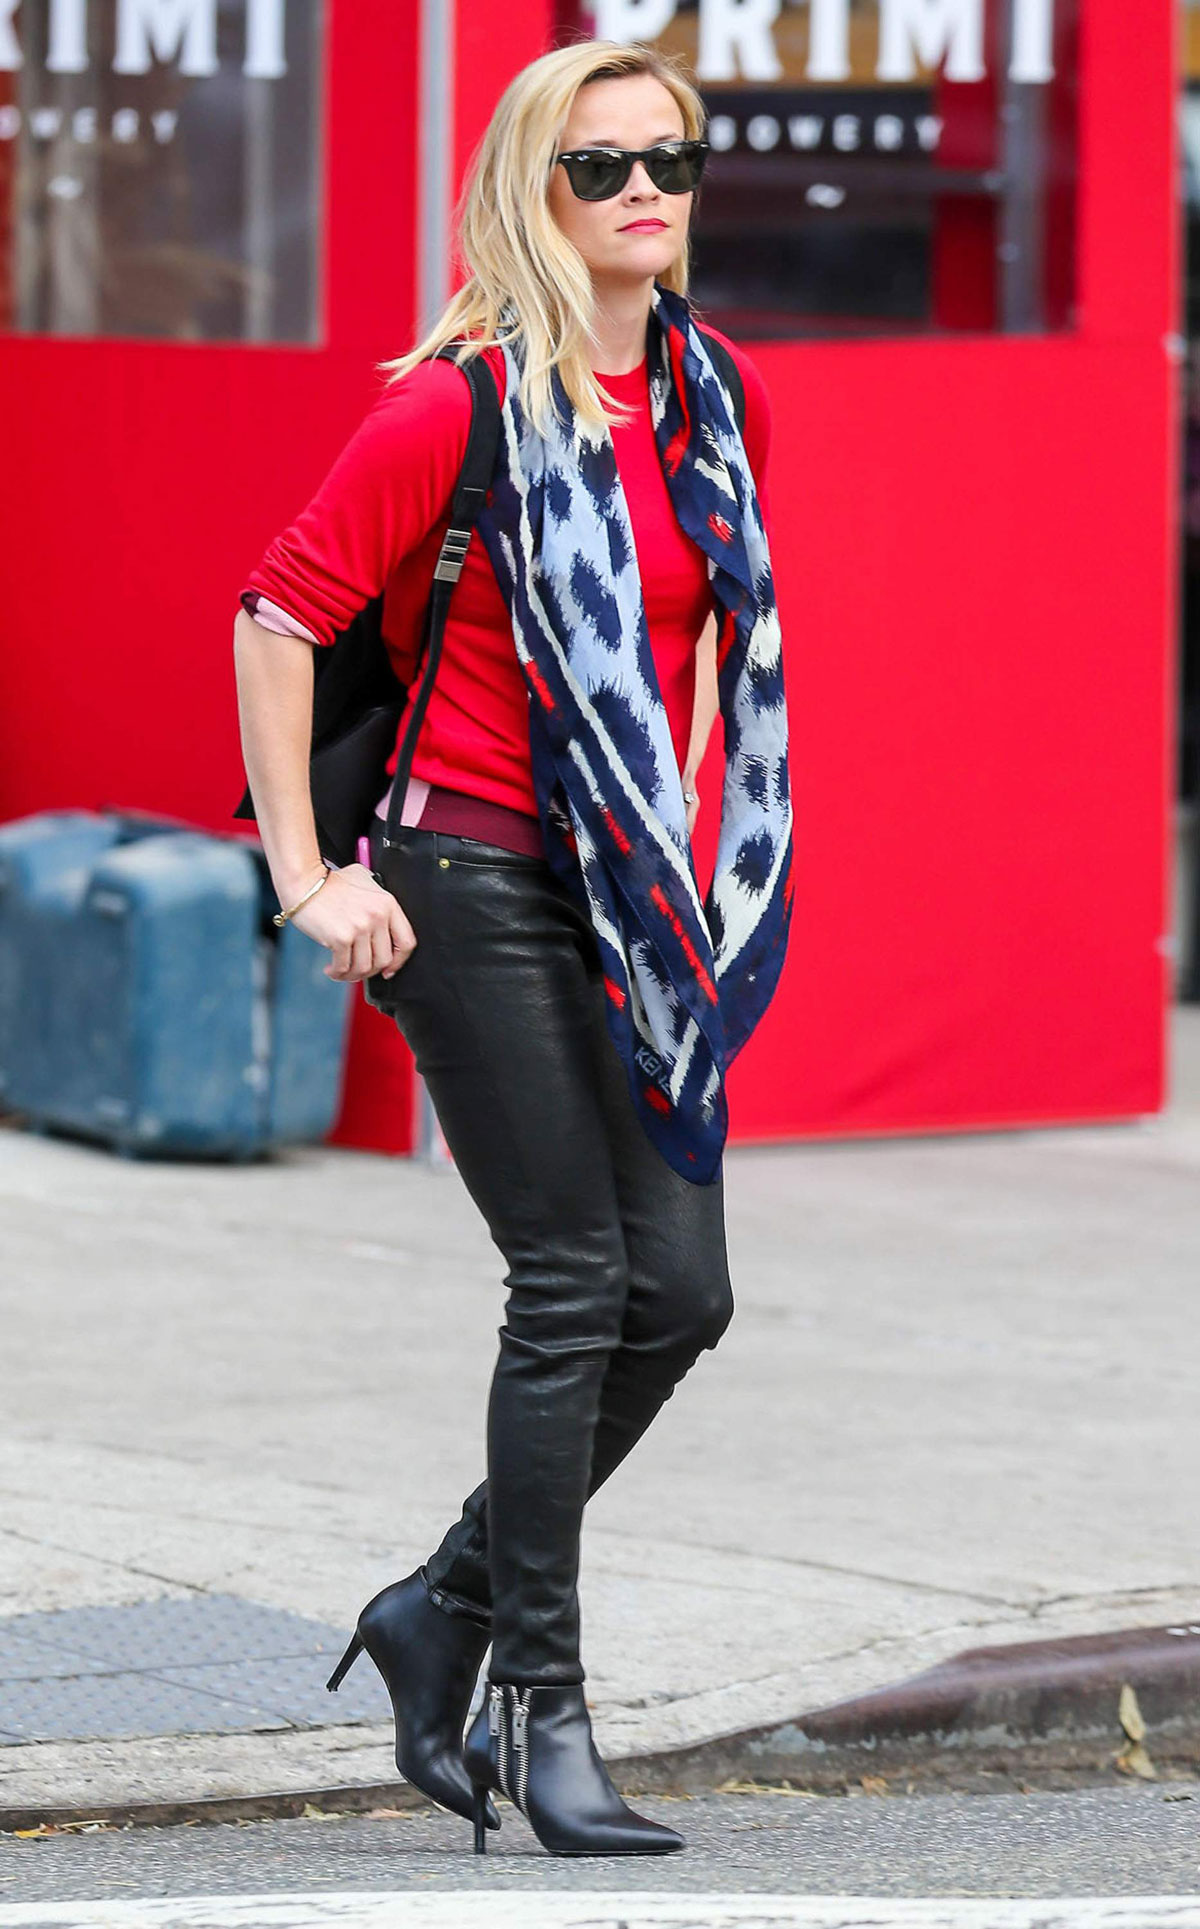 Reese Witherspoon is seen in New York City